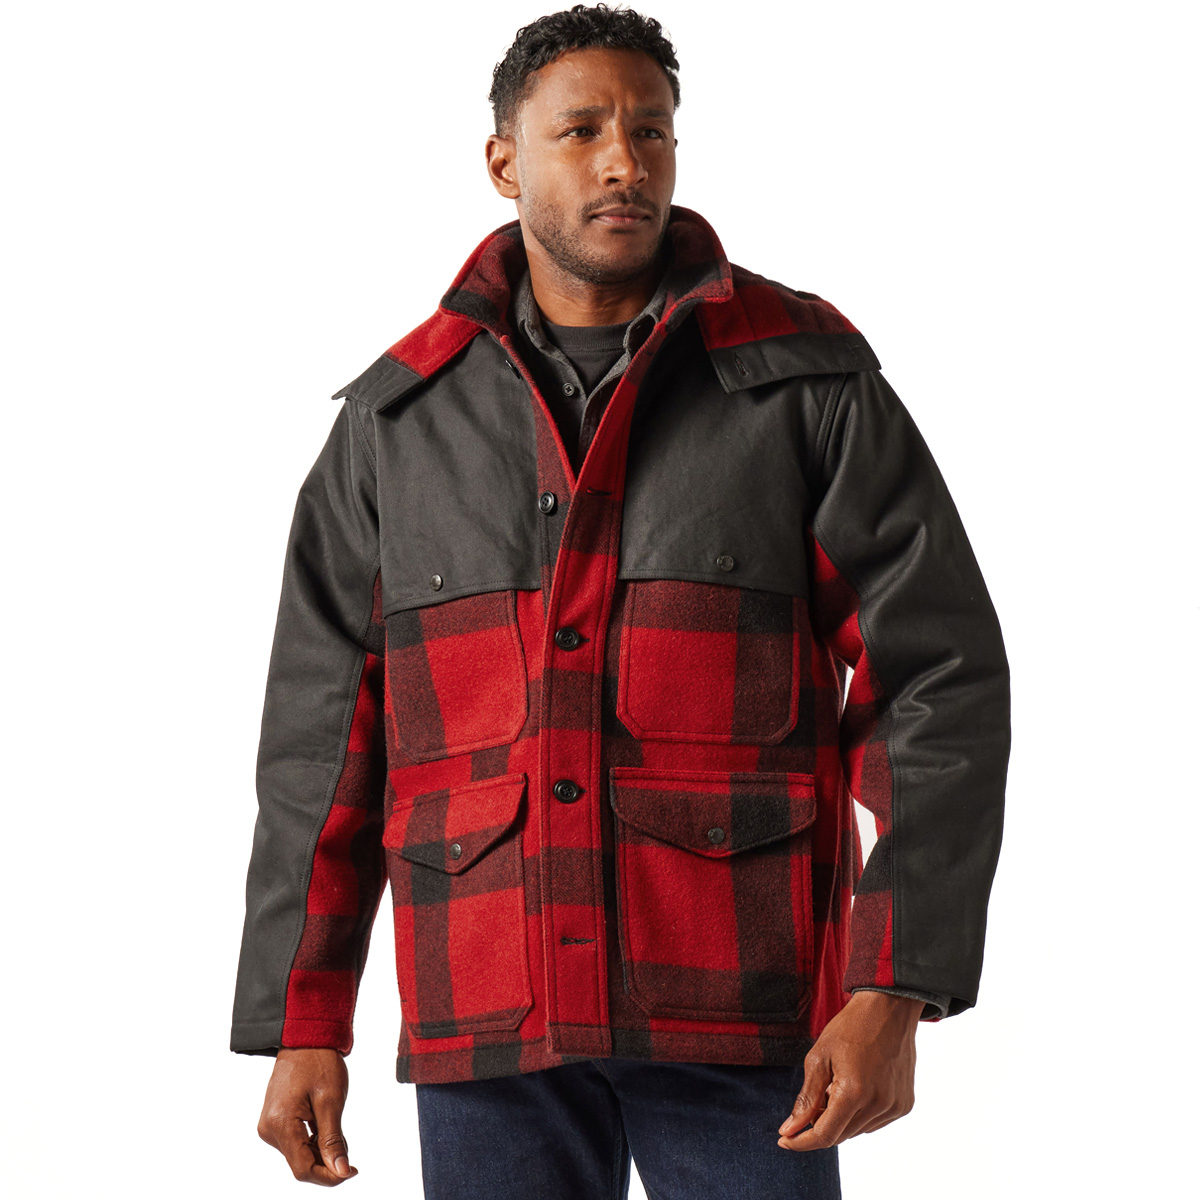 Filson Mackinaw Wool Double Coat Red Black Classic Plaid, made of 100% virgin Mackinaw Wool for comfort, natural water-repellency and insulating warmth in any weather conditions.